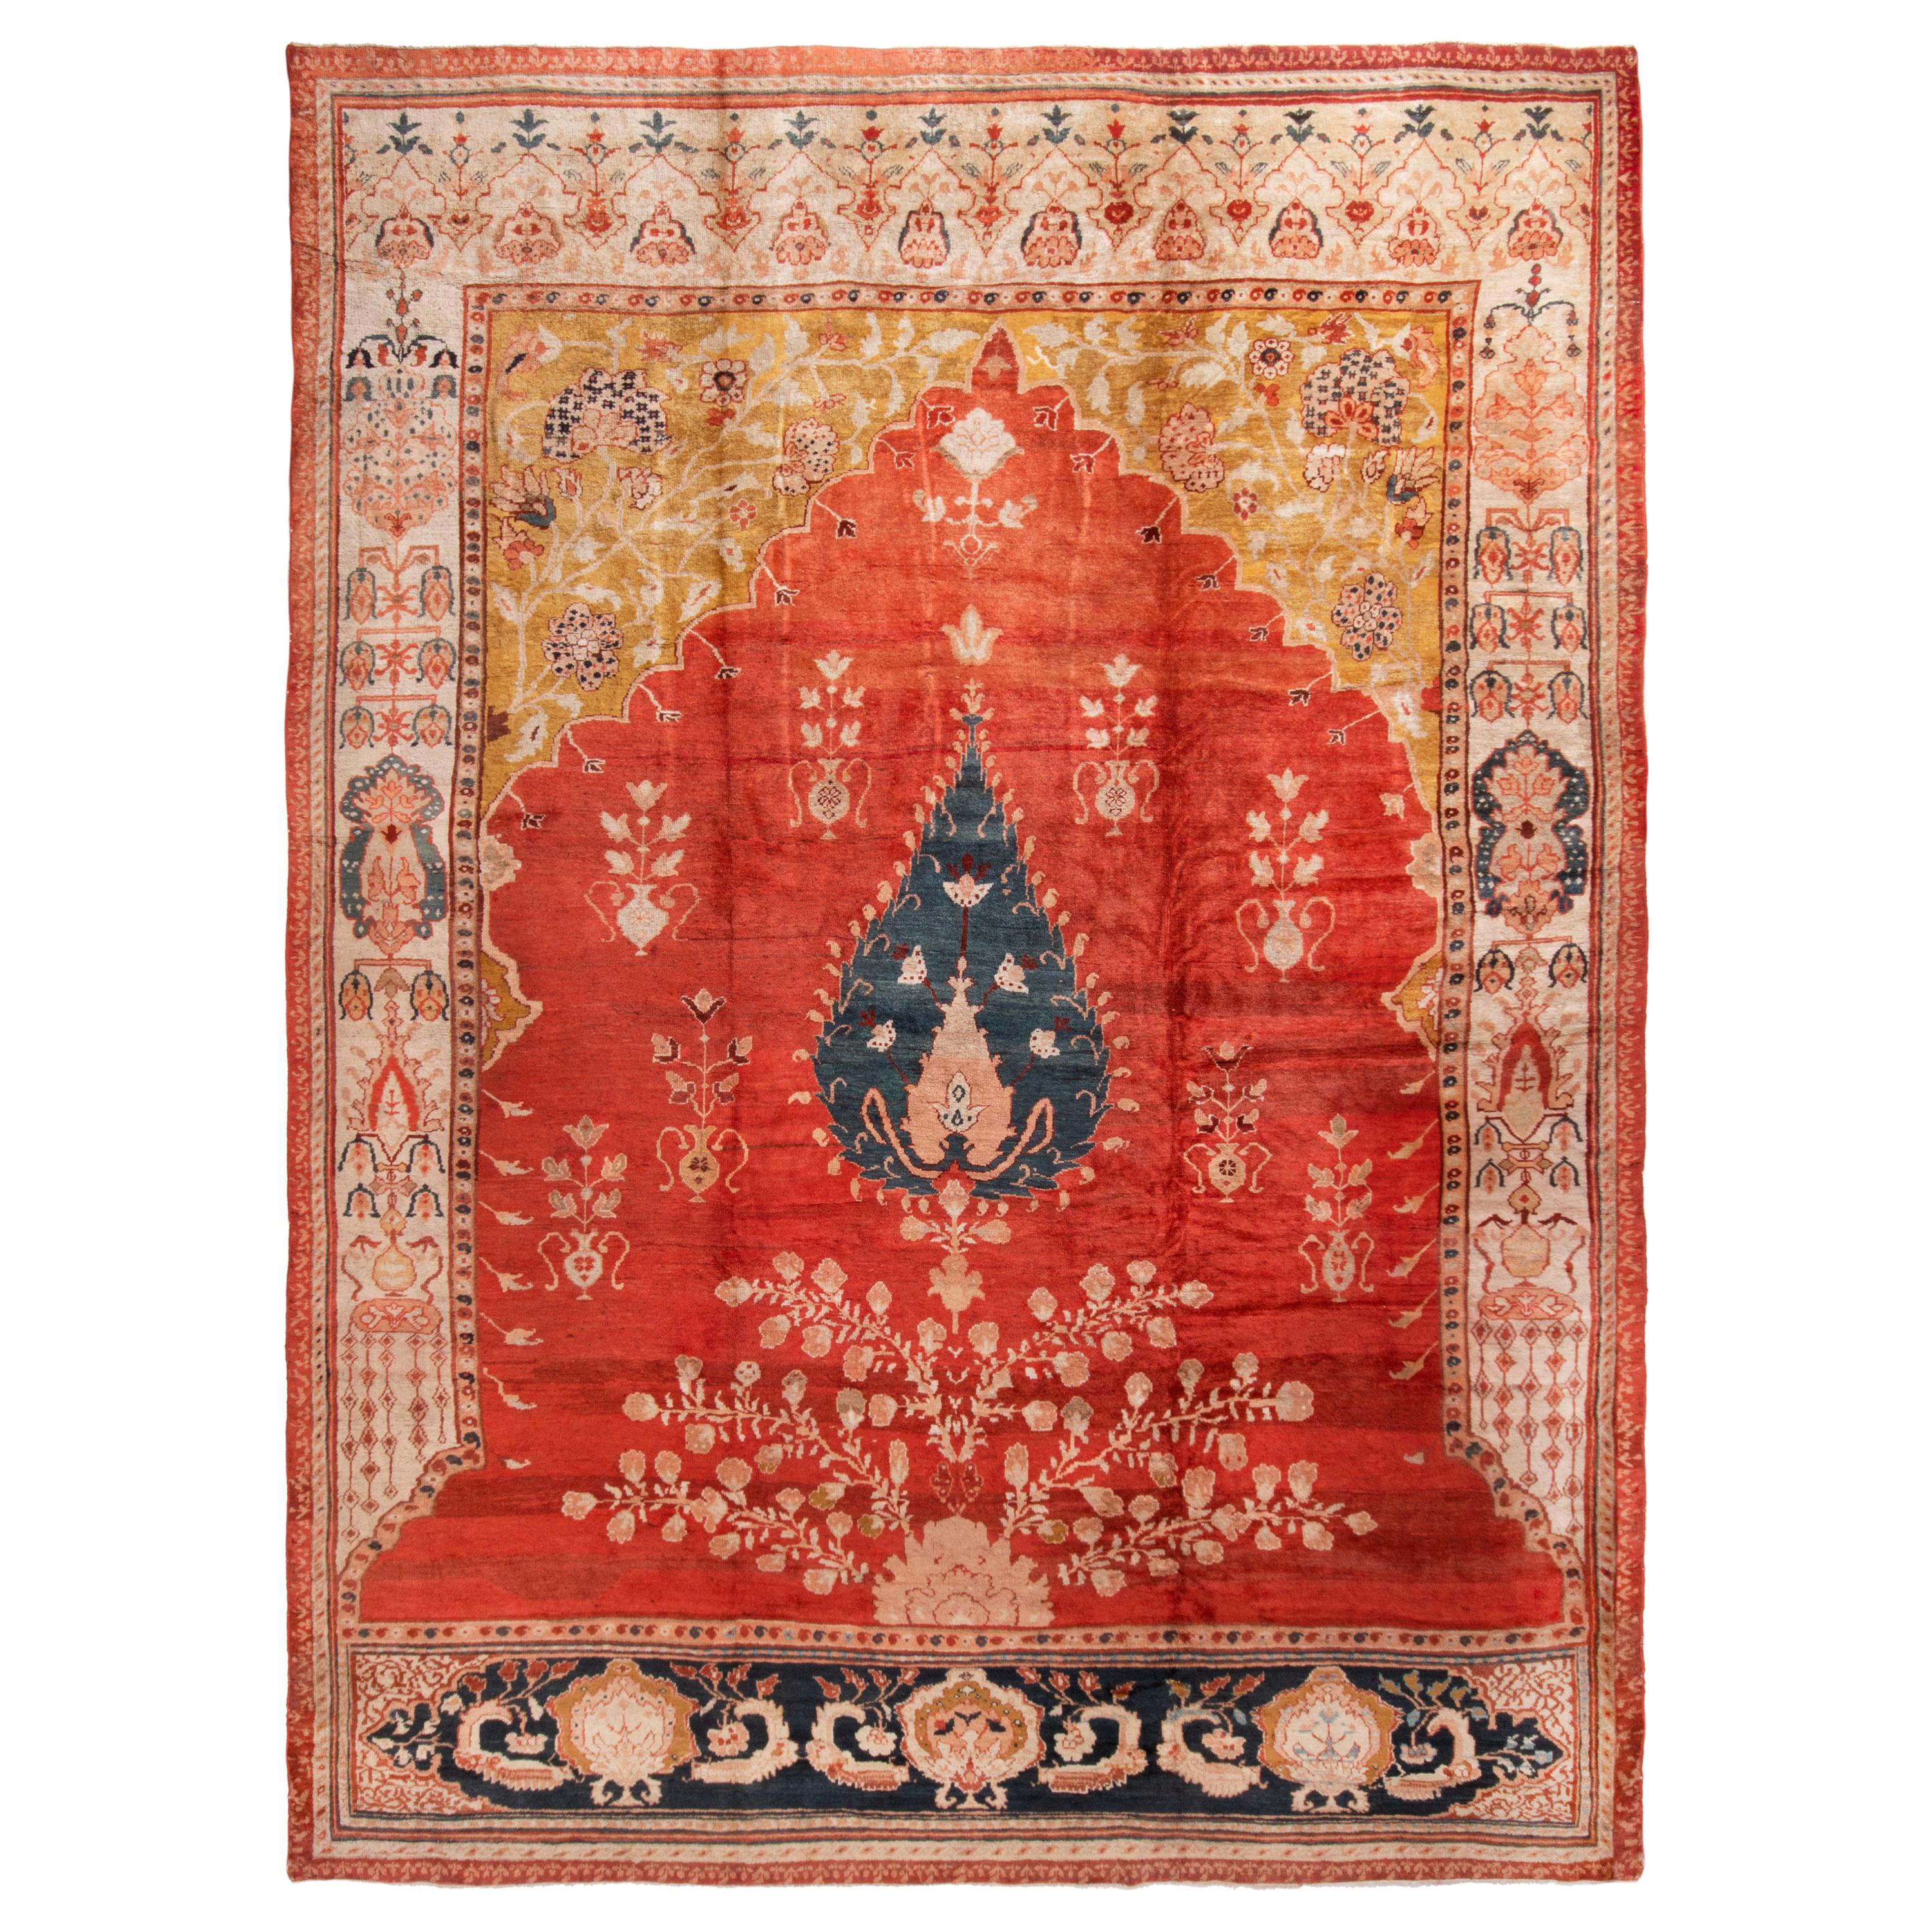 Antique Sultanabad Red and Gold Medallion Rug with Geometric-Floral Patterns